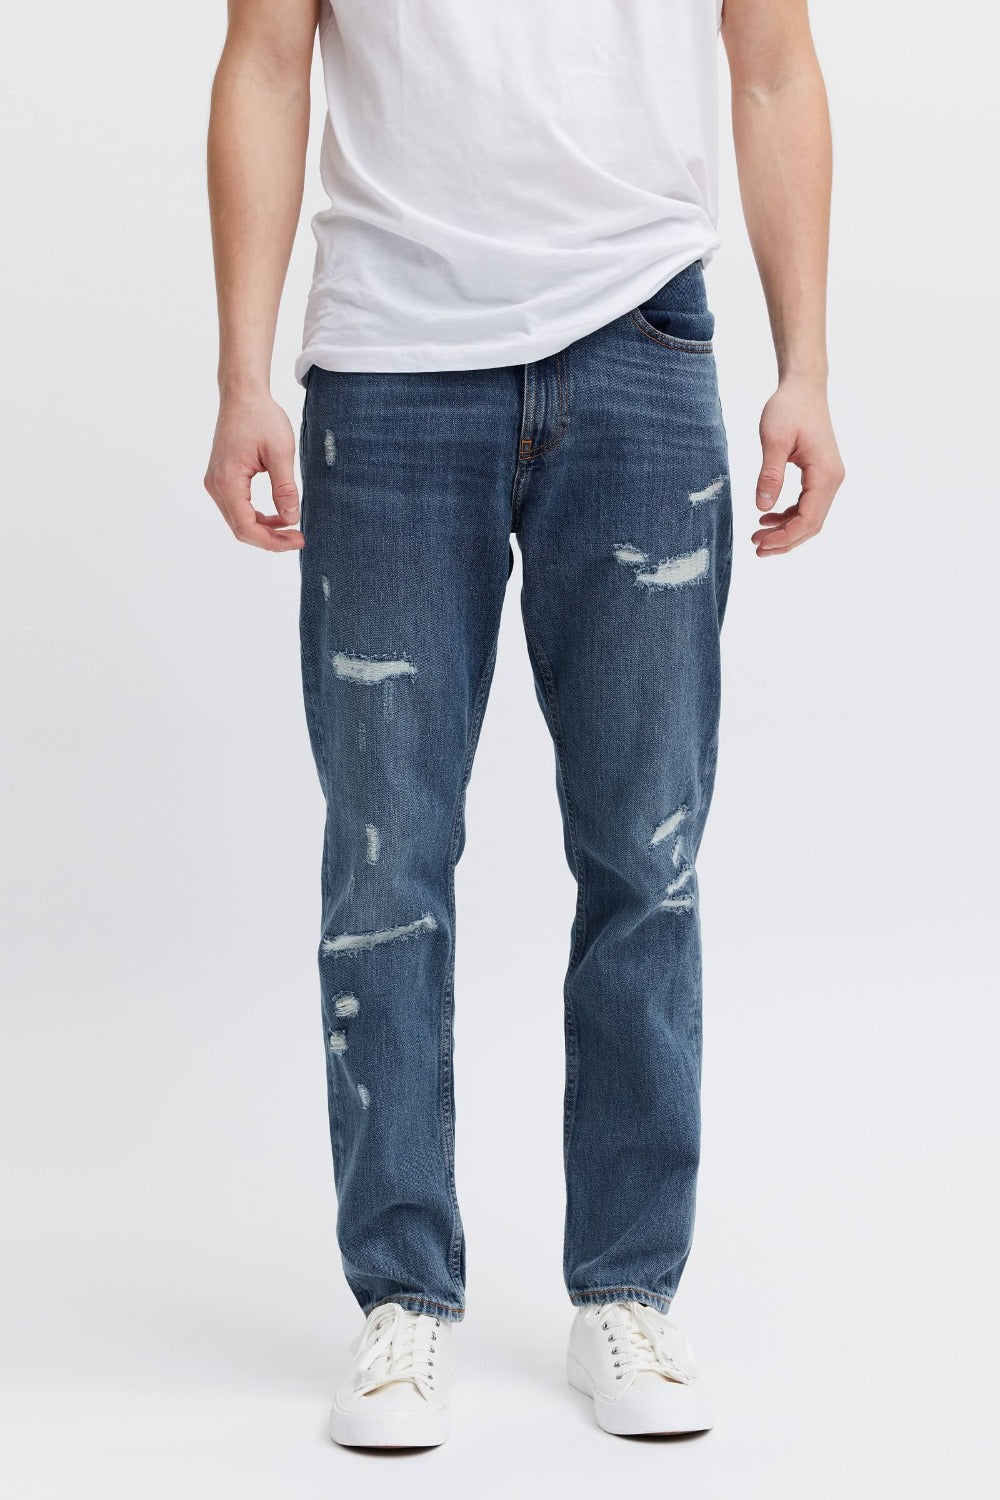 Lease Roots Jeans